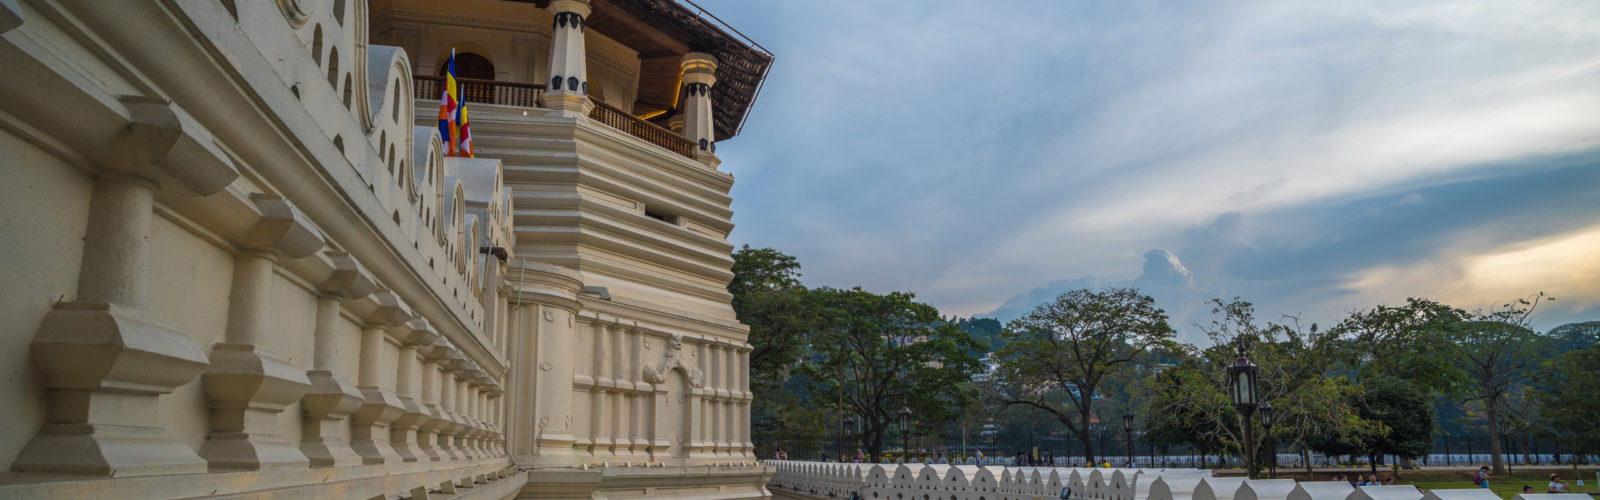 kandy-tooth-temple-evening